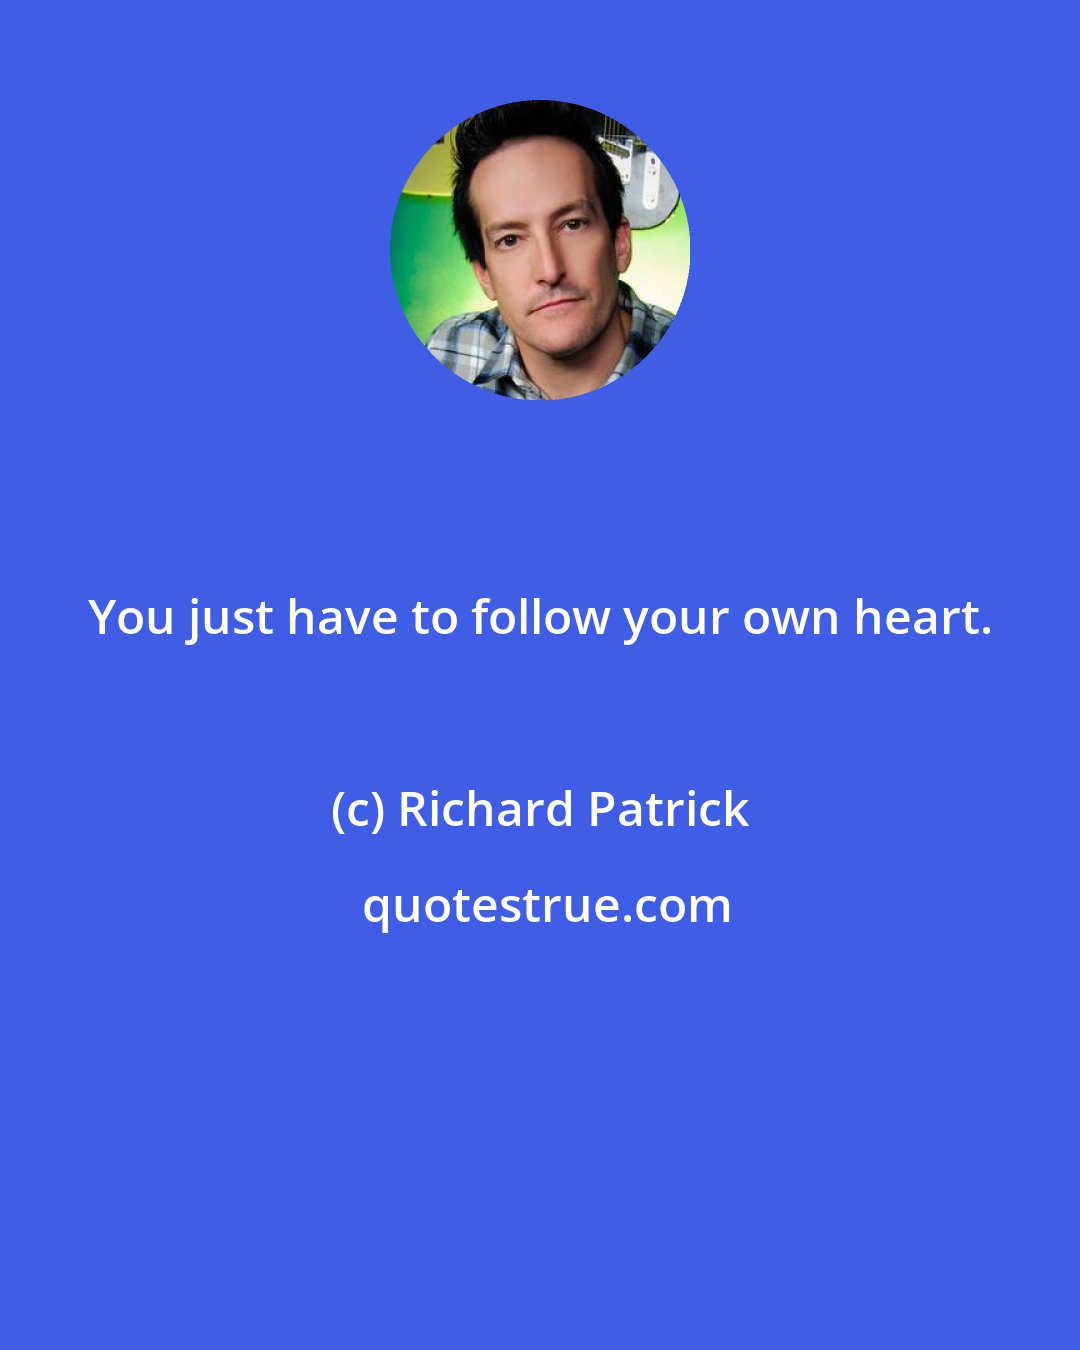 Richard Patrick: You just have to follow your own heart.